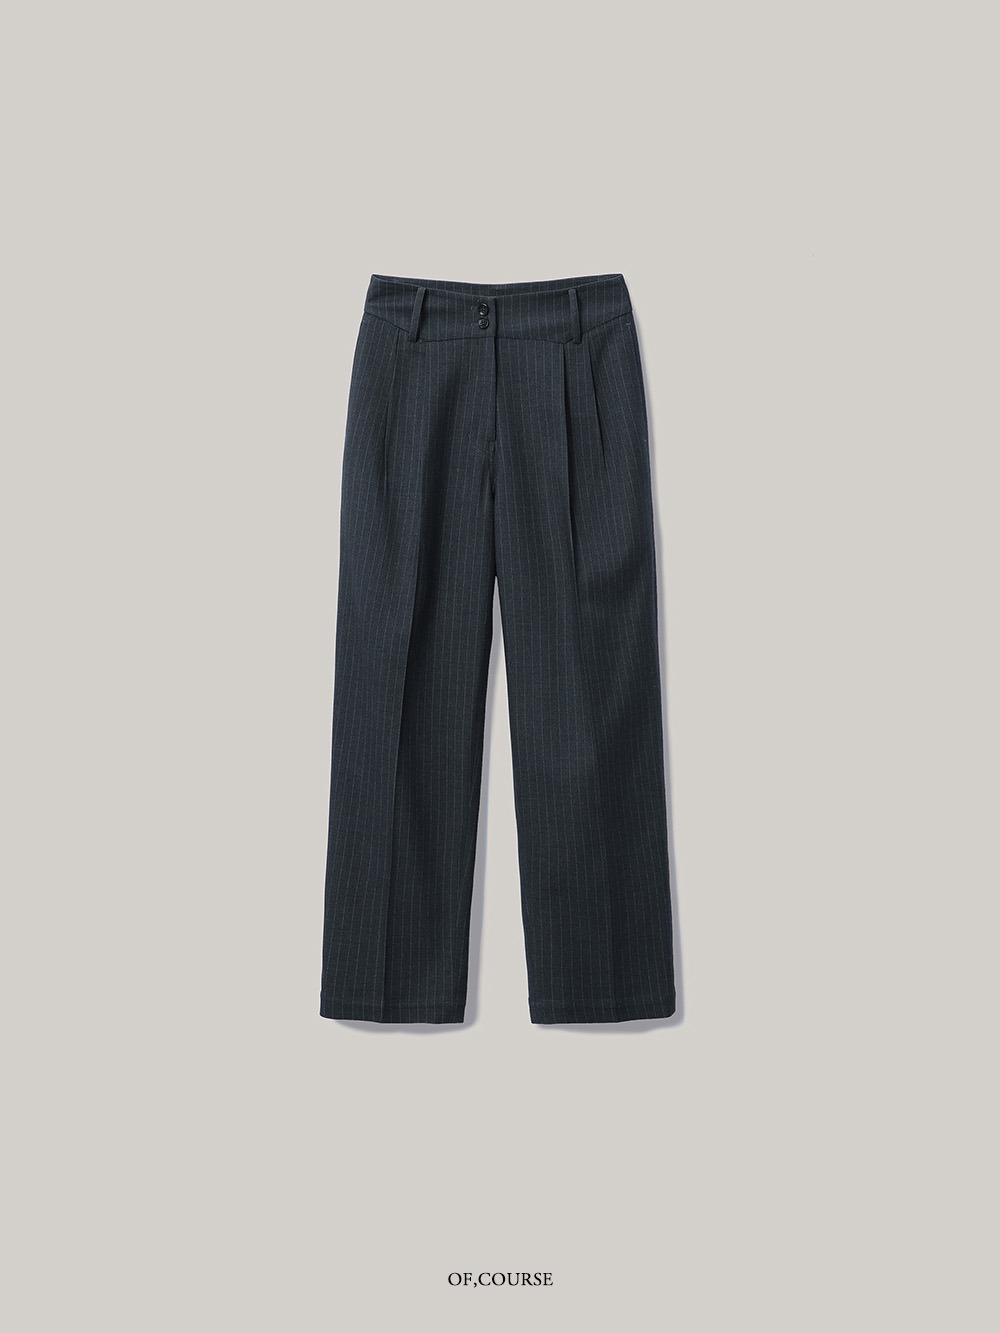 [Re-open][OFC]Set-up Stripe Tuck Pants (charcoal)